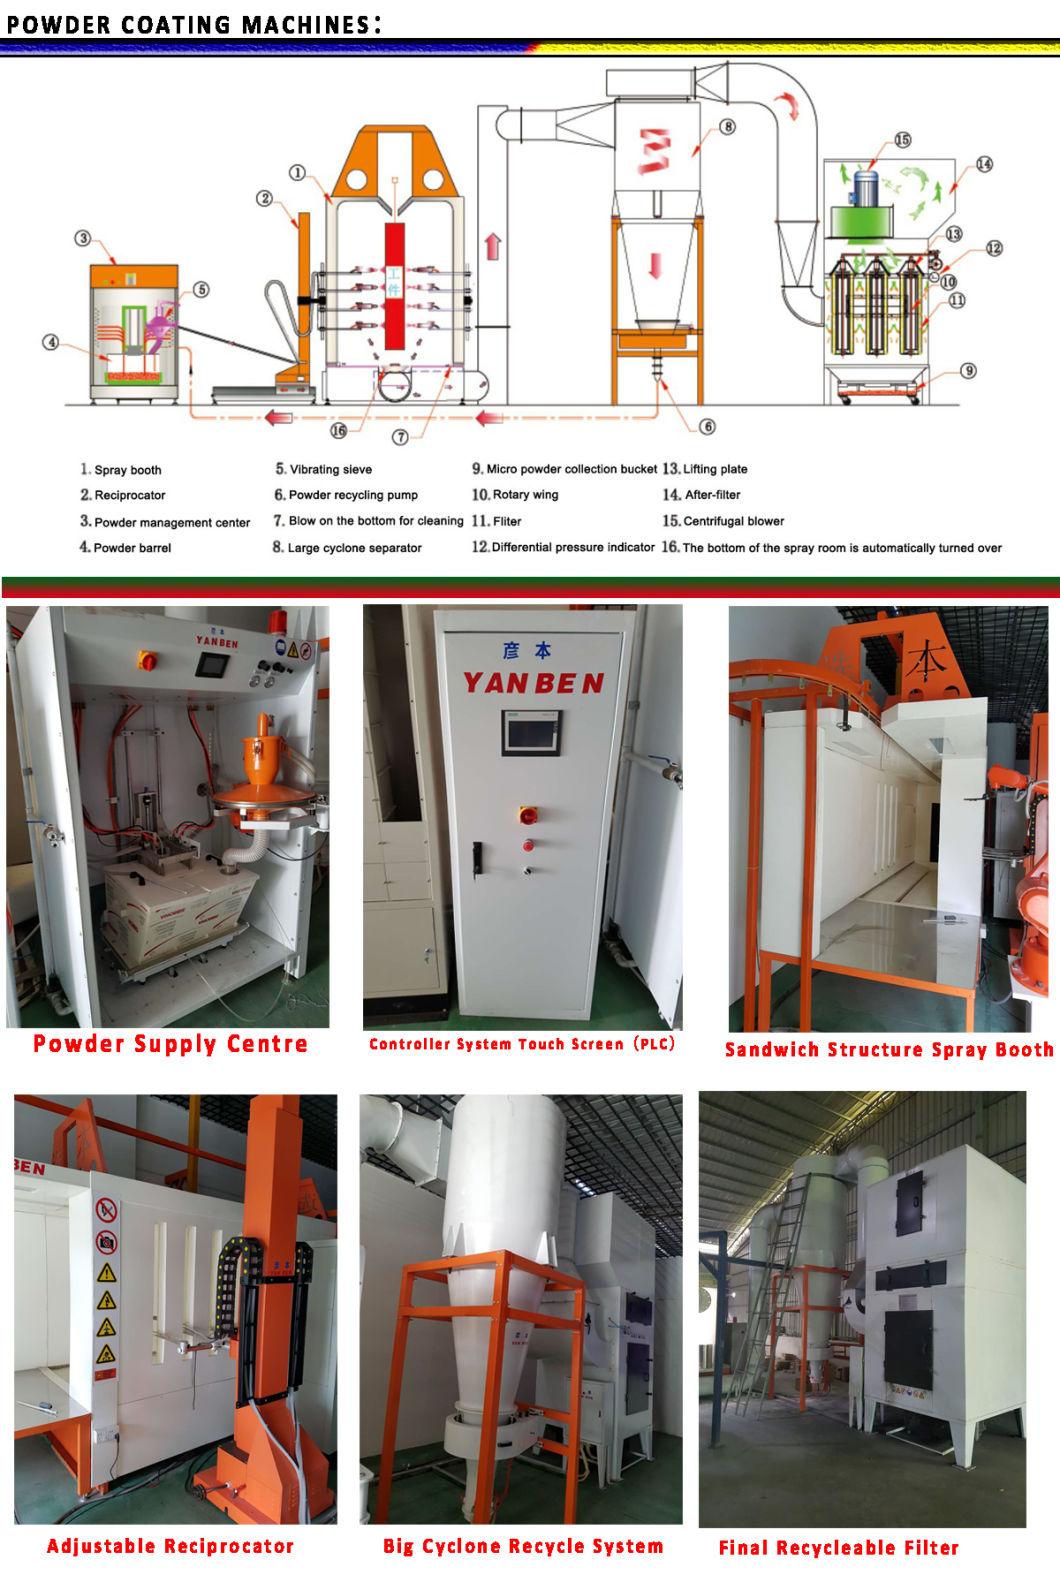 Build Powder Coating Equipments with High Efficiency